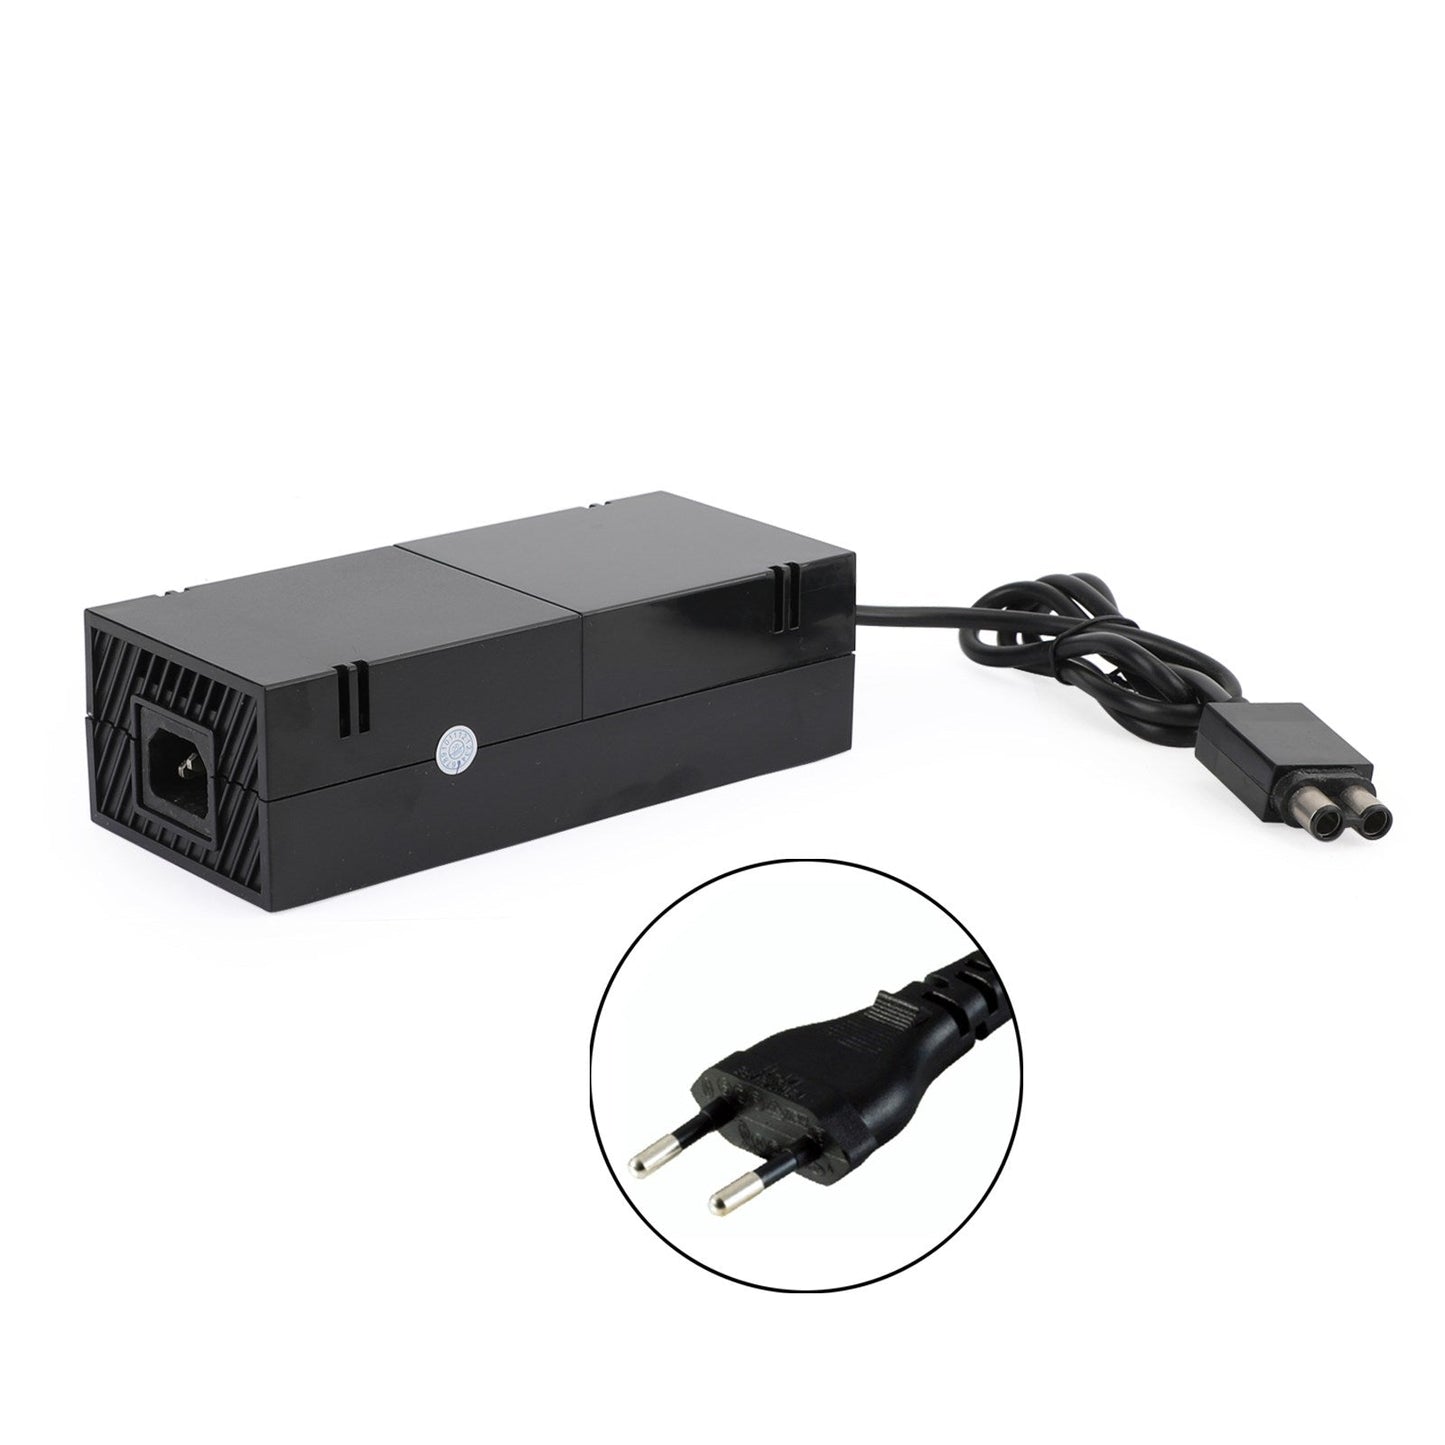 Power Supply AC Adapter 135W 10.83A Power Cord Cable Fit for Xbox one Console EU